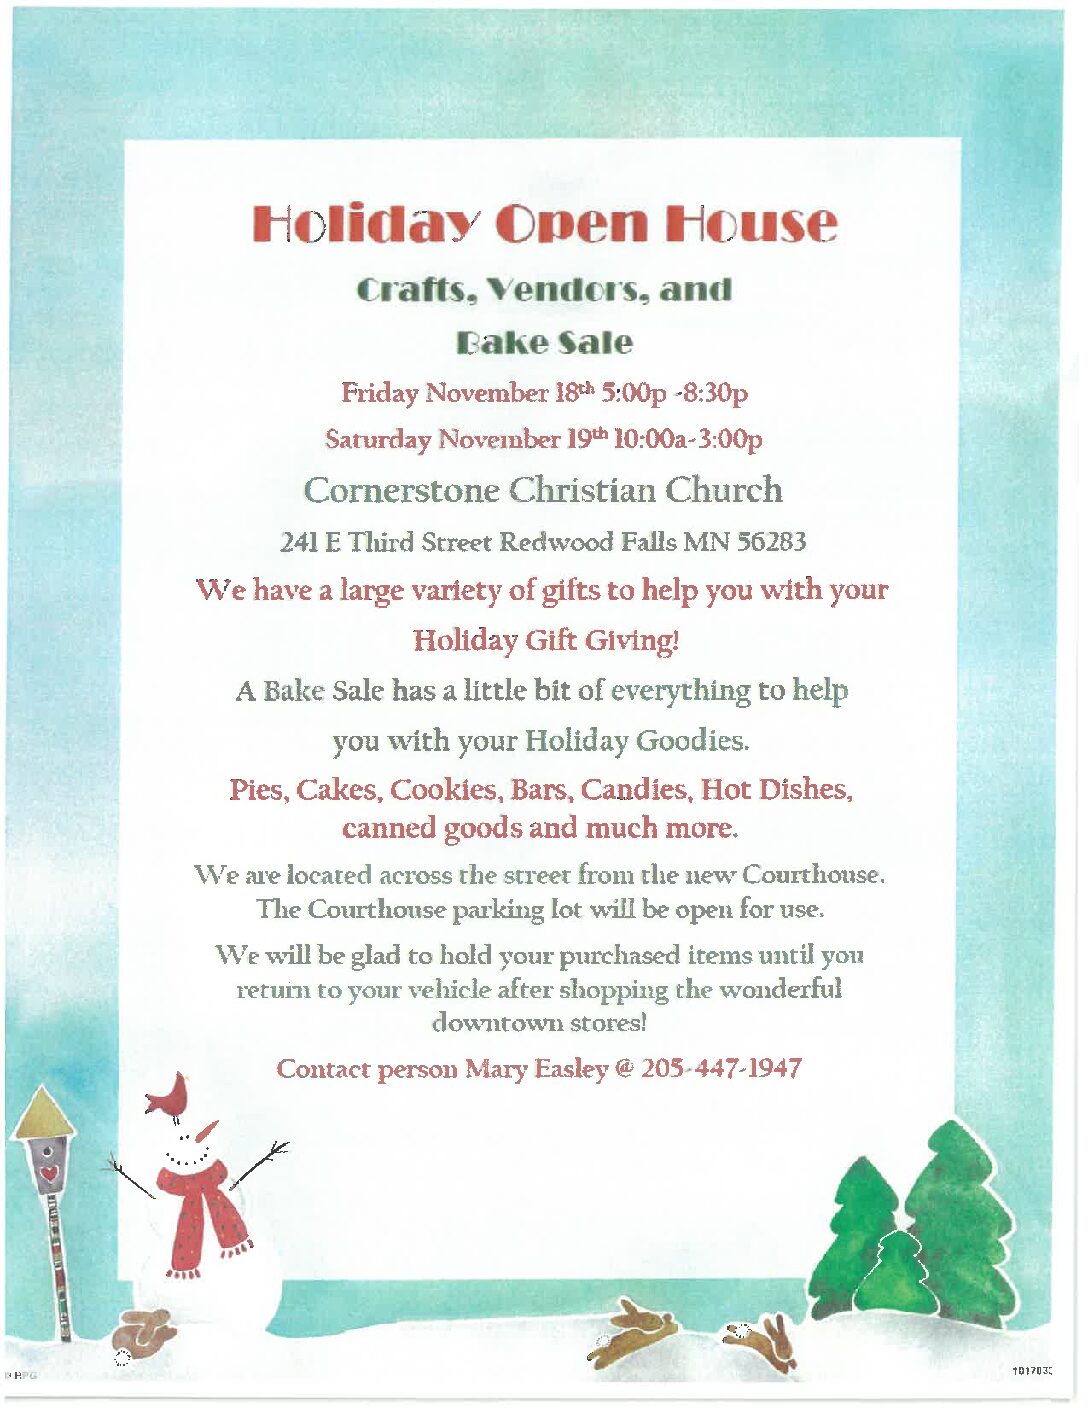 <h1 class="tribe-events-single-event-title">Holiday Open House Cornerstone Christian Church</h1>